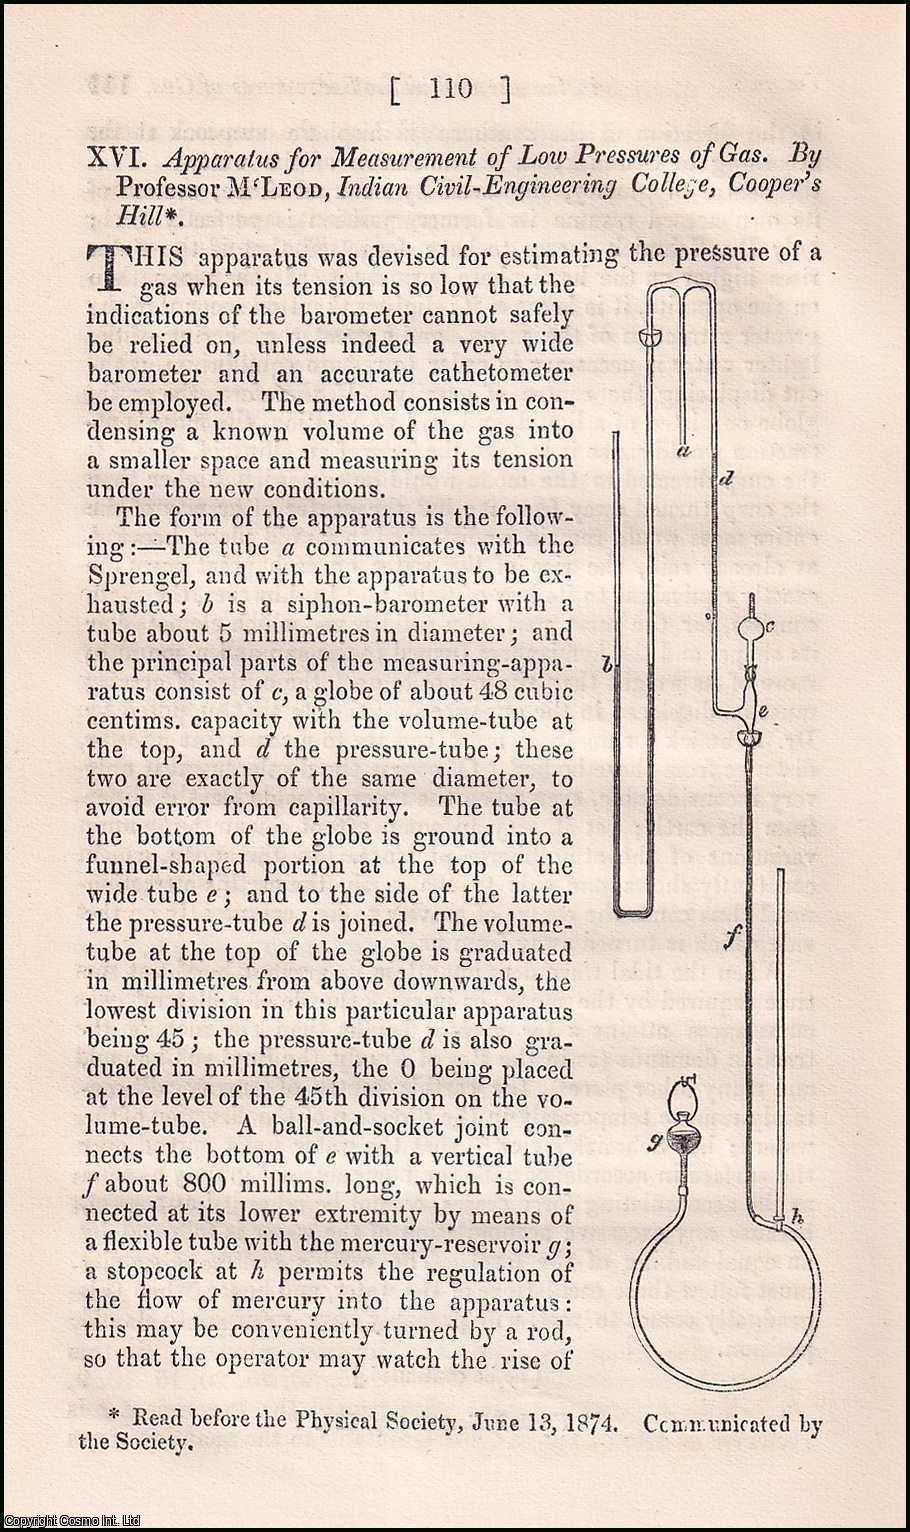 Prof. McLeod, Indian Civil-Engineering College, Cooper's Hill - Apparatus for Measurement of Low Pressures of Gas. An original article from The London, Edinburgh, and Dublin Philosophical Magazine and Journal of Science, 1874.